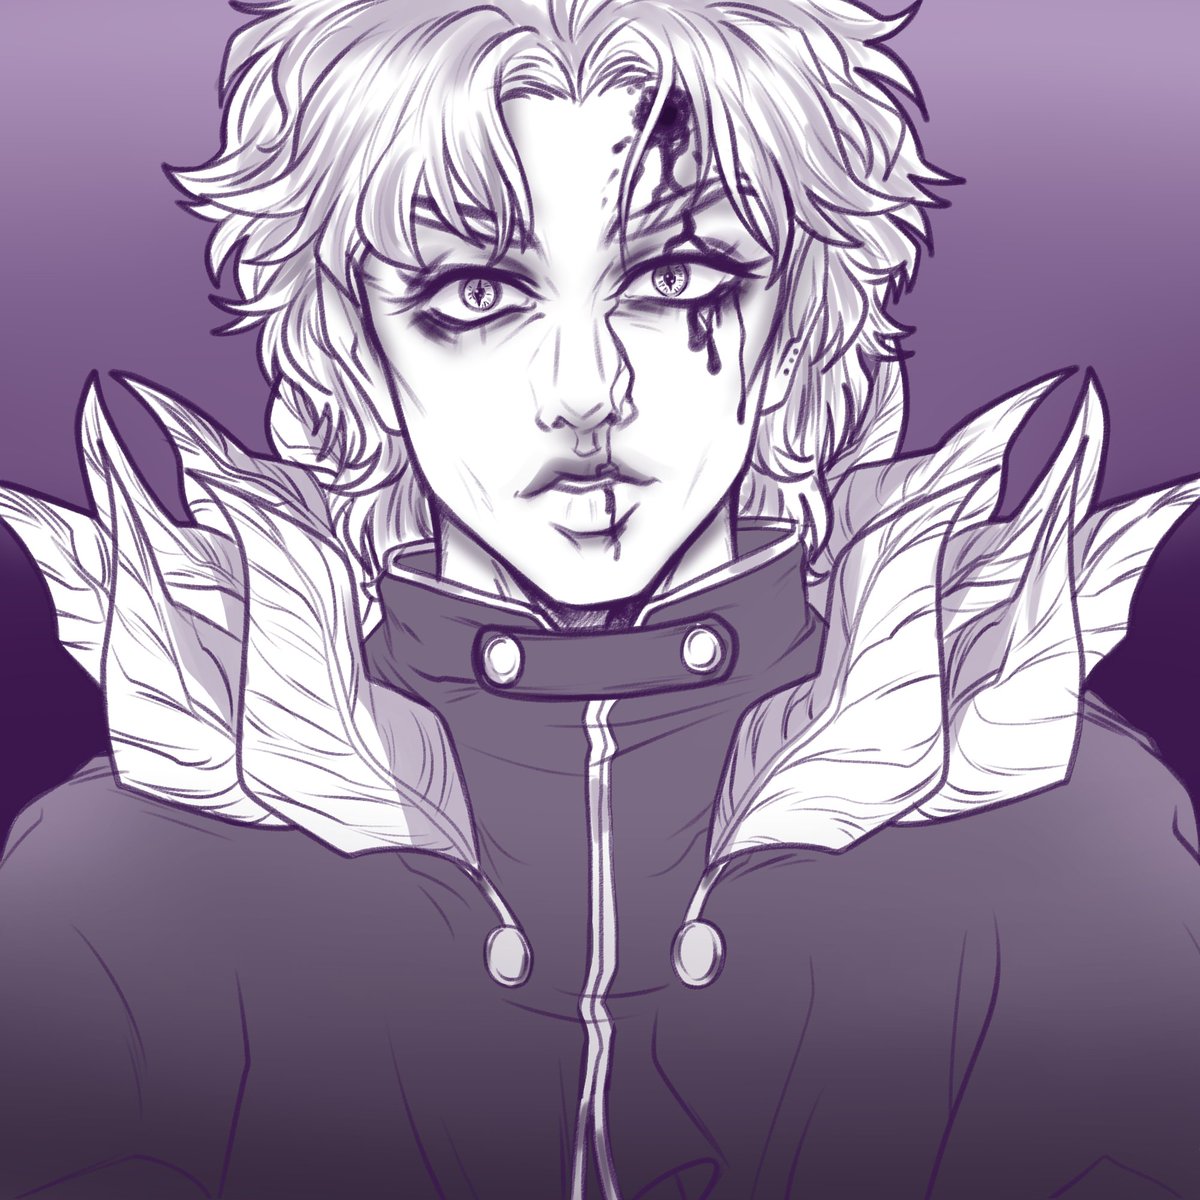 Here's a request I get on instagram, a quick sketch of Dio with his feather outfit from PB.

Now I have to continue my TABC courses, so I'll leave for now. ^^

#JJBA #PhantomBlood #DioBrando #sketch #paintoolsai